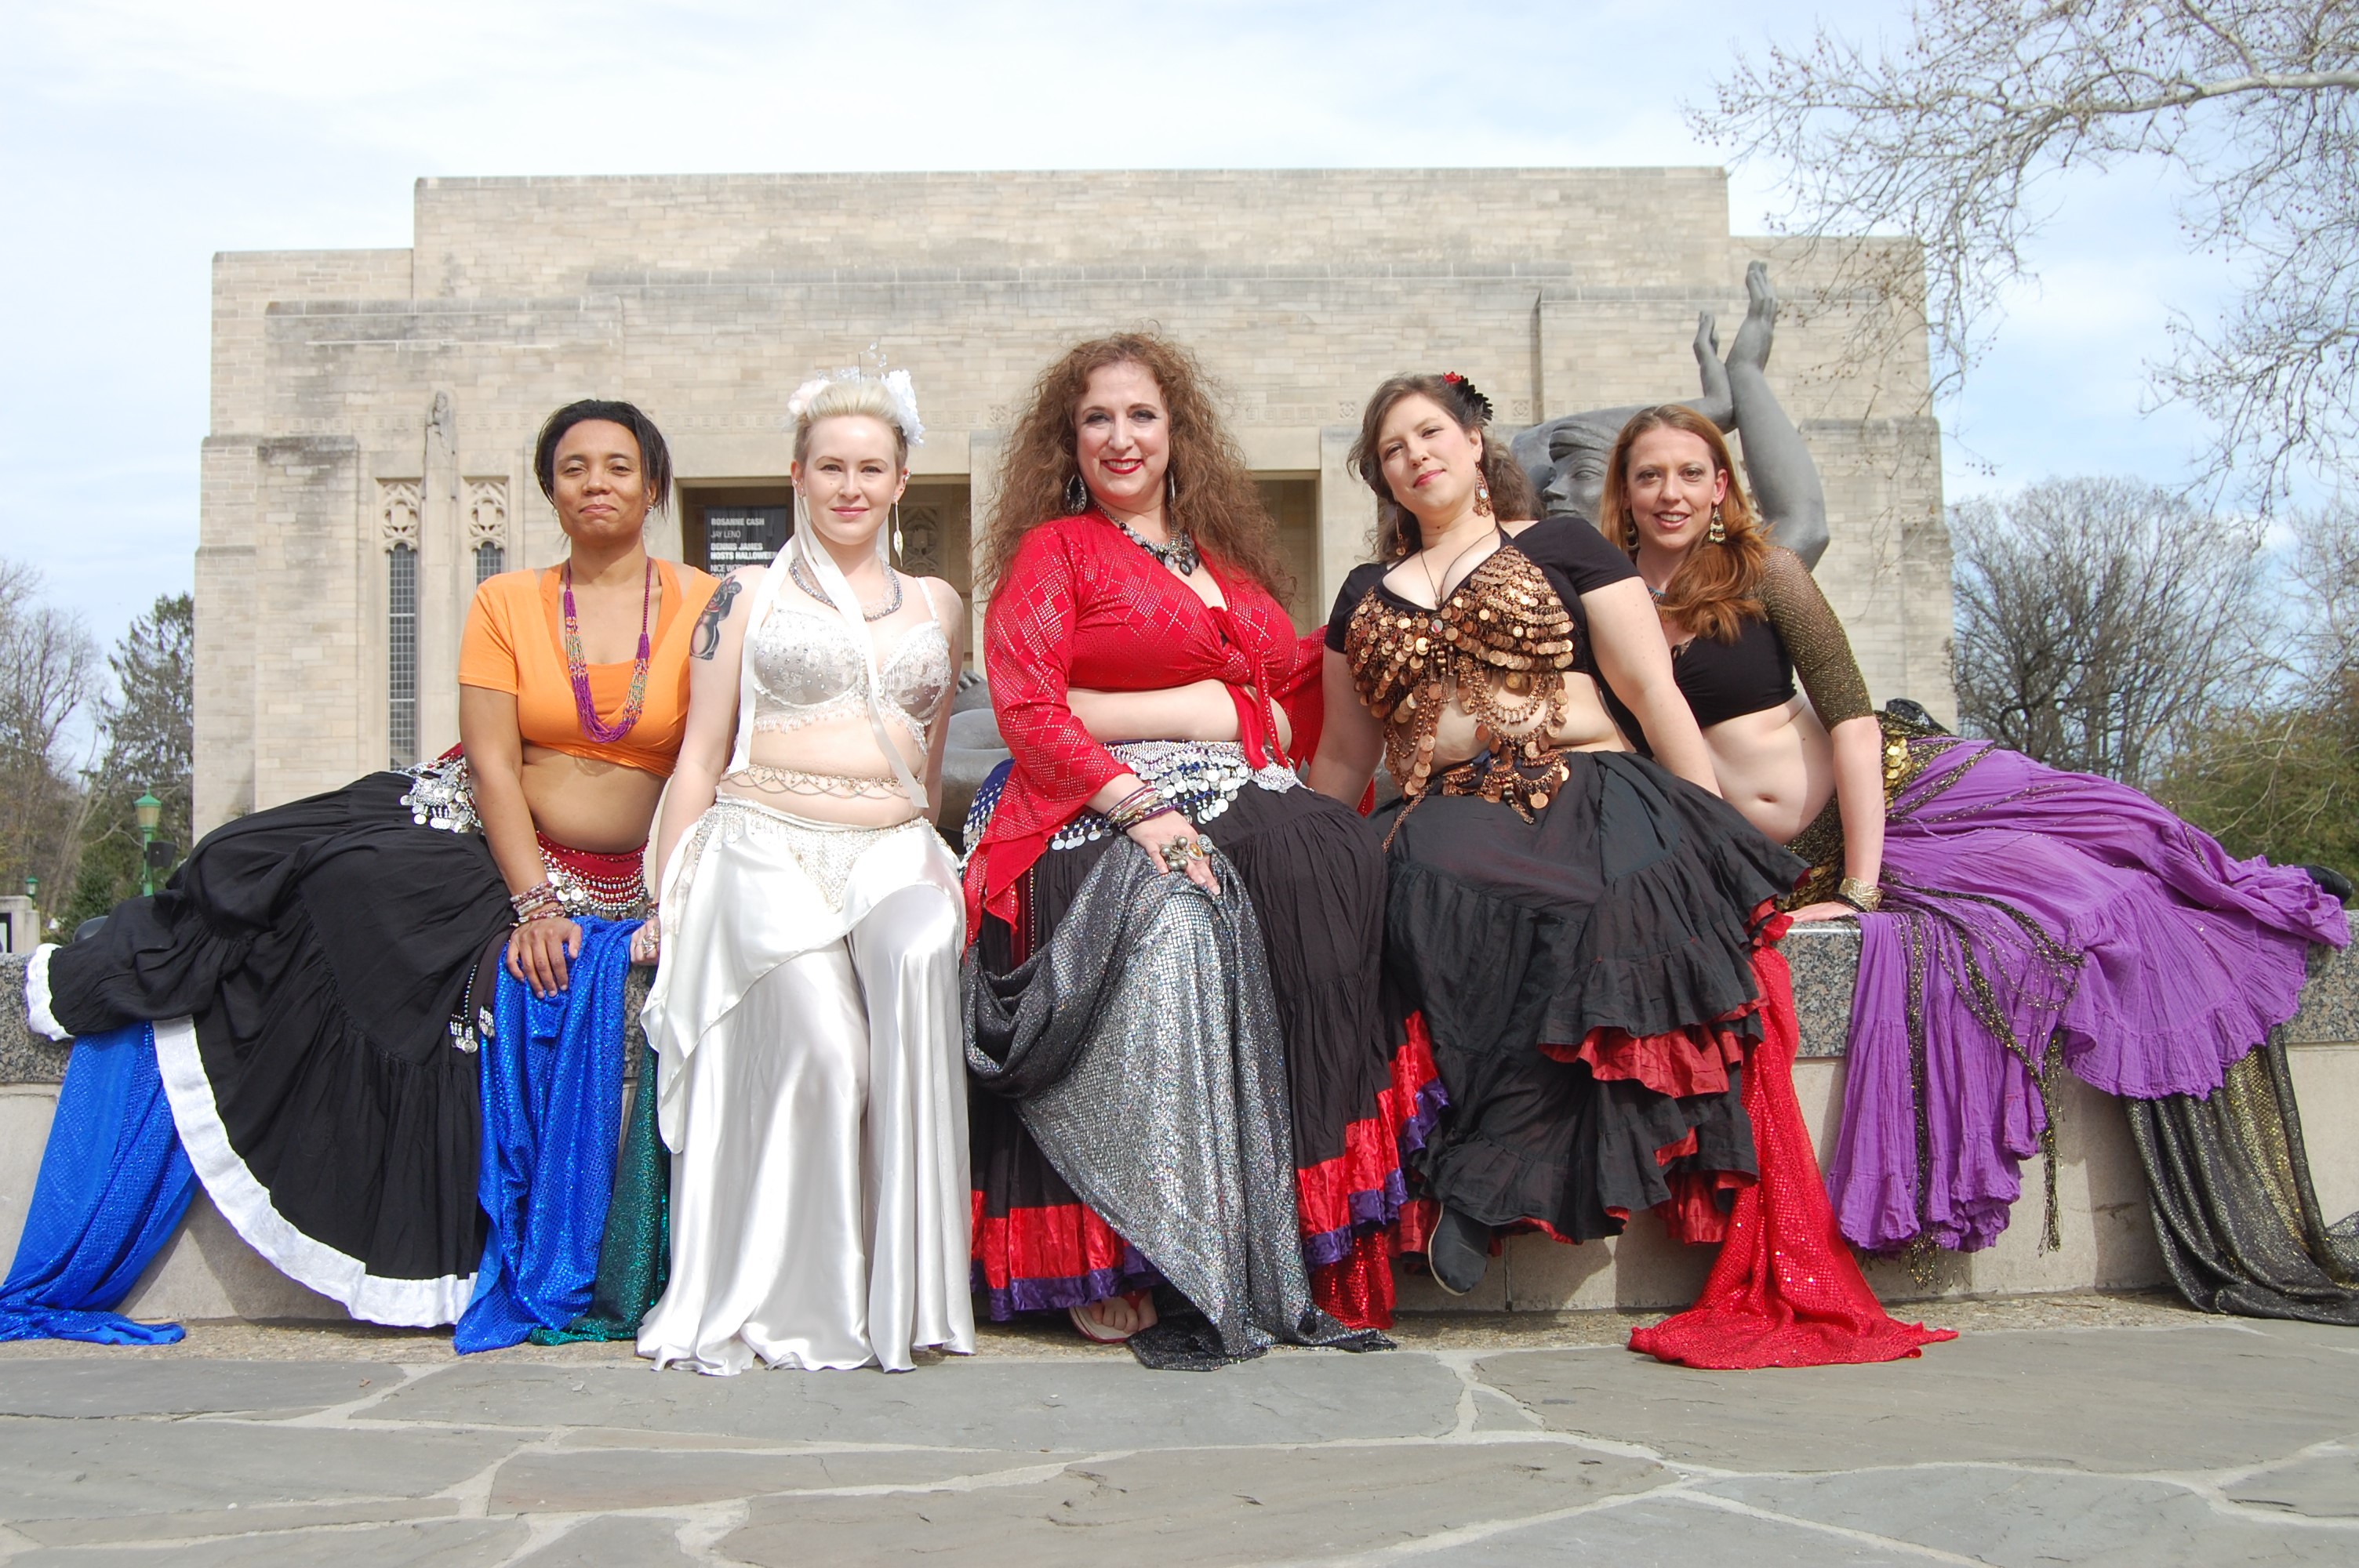 Different Drummer Belly Dancers troupe photo. 